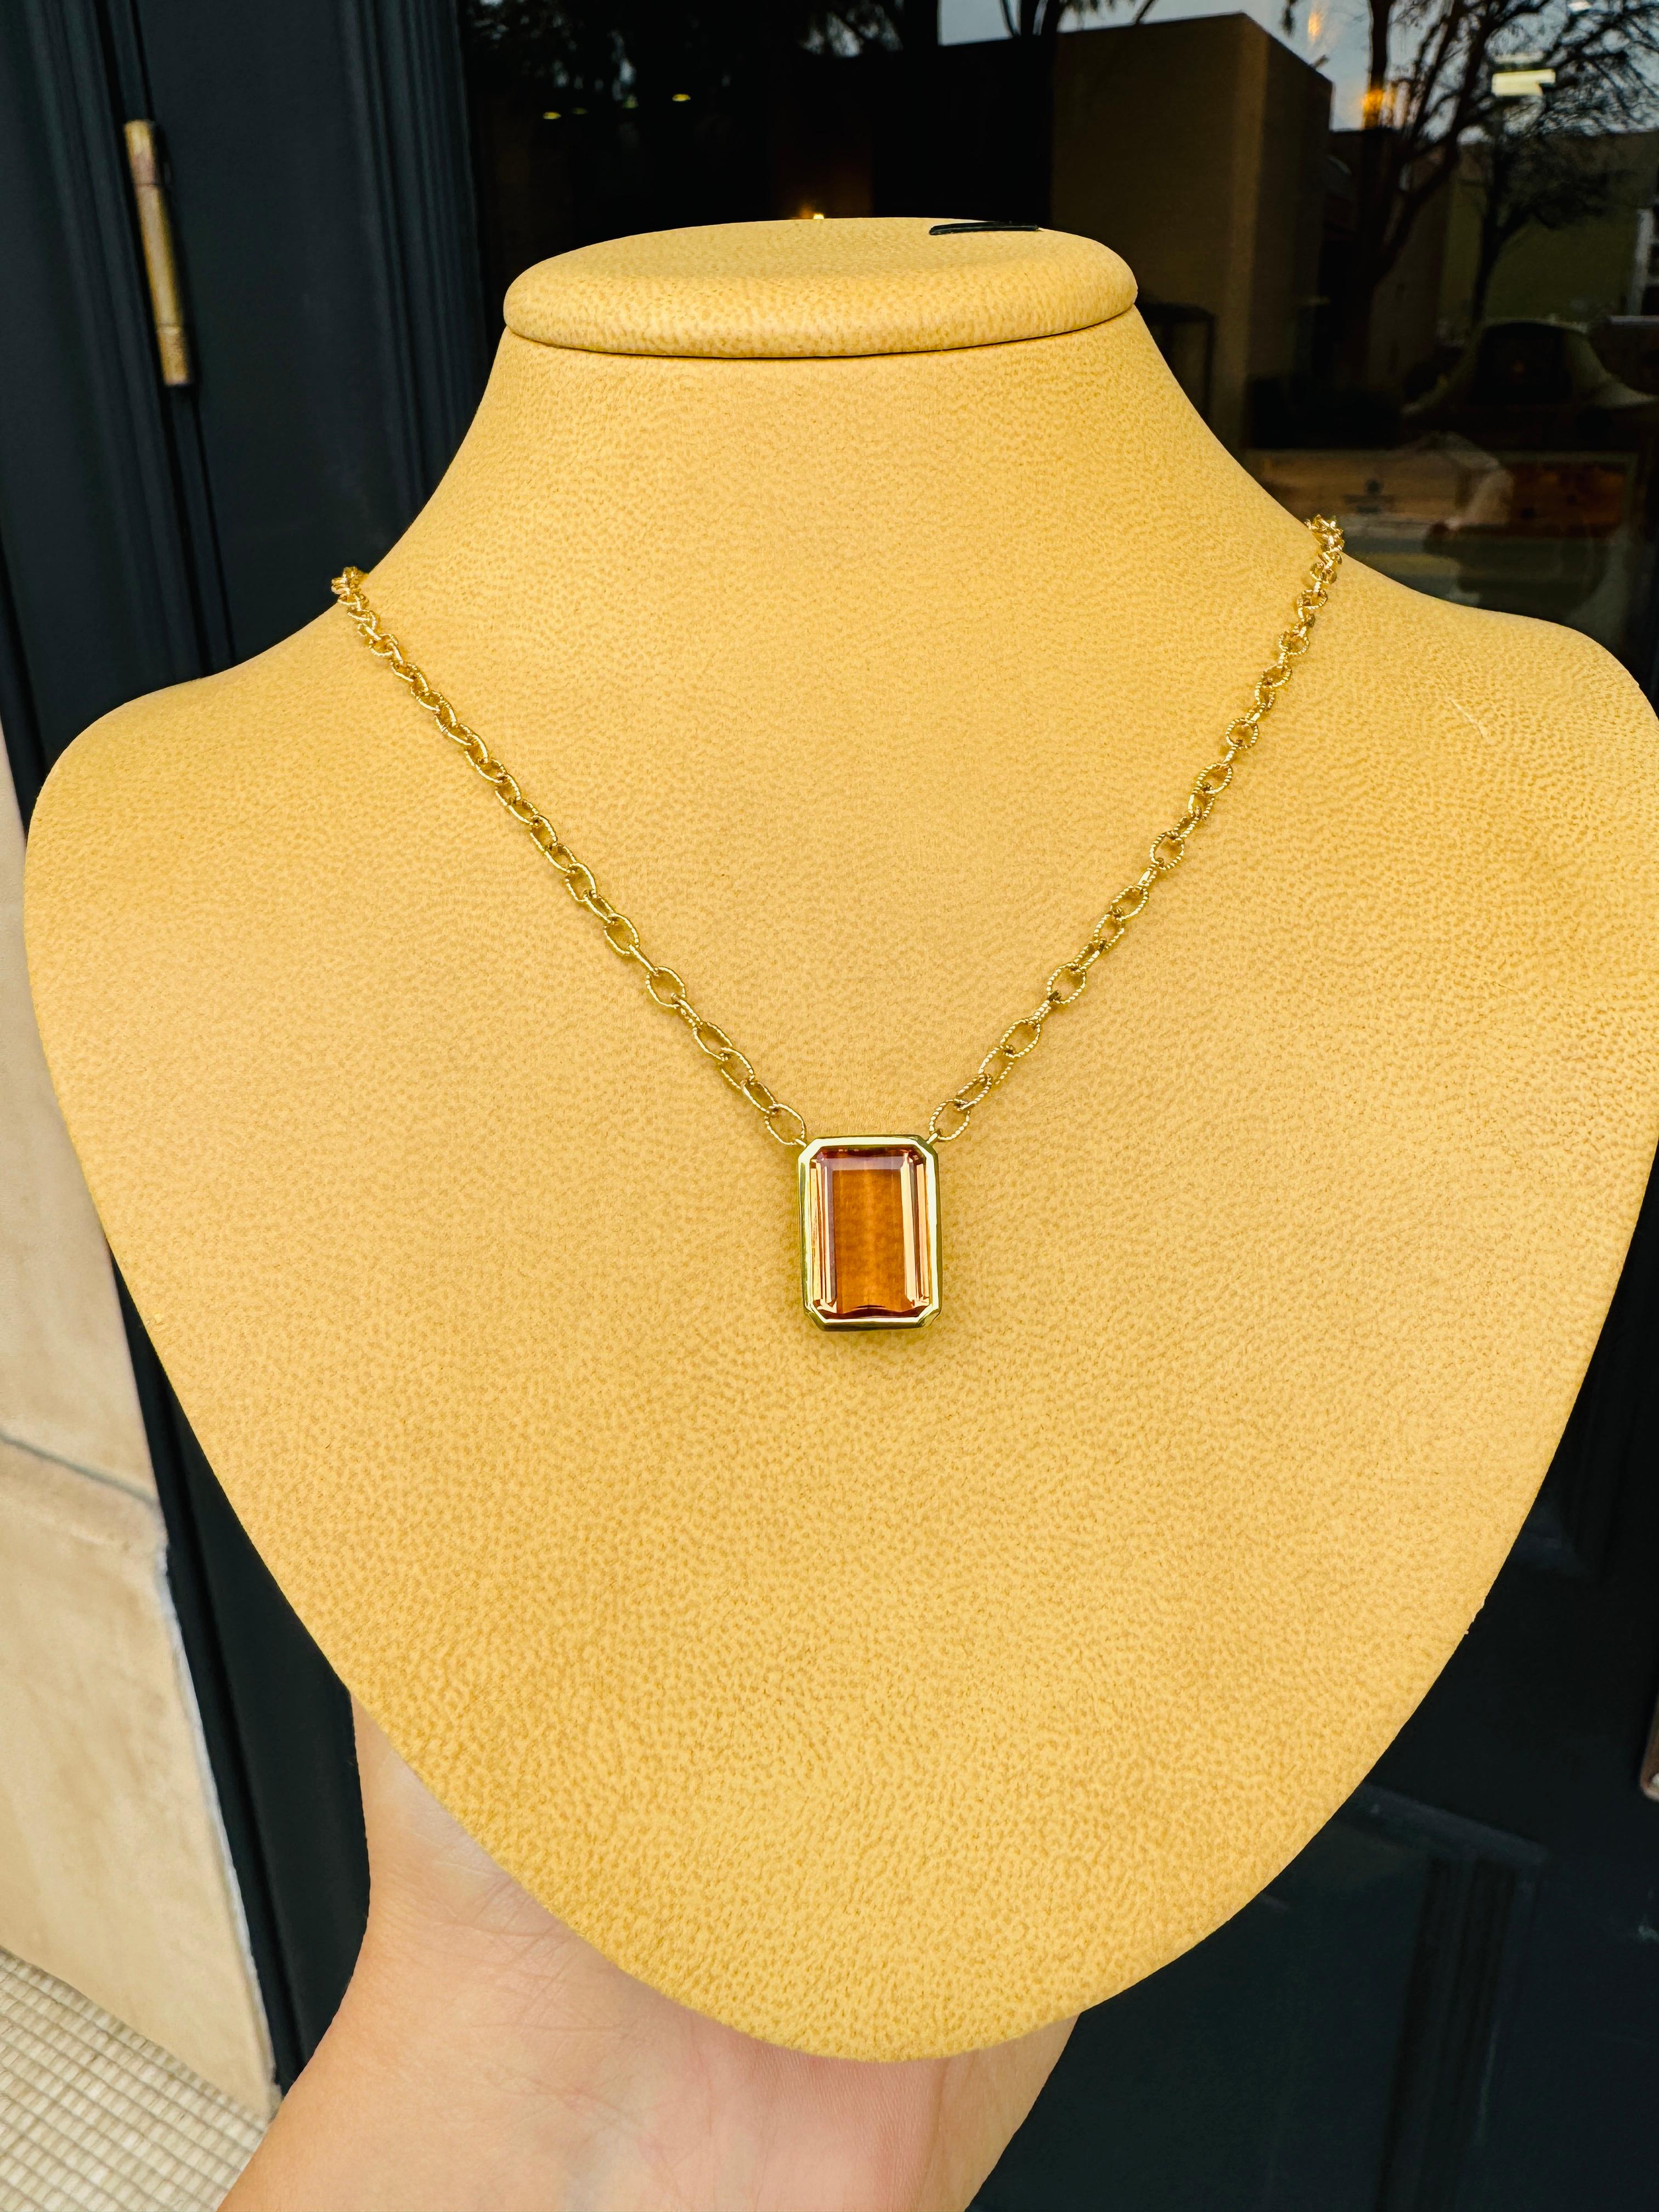 Rectangular Emerald Cut Amber-colored precious Topaz pendant hand set in 18k yellow gold with 18k yellow gold twisted 18